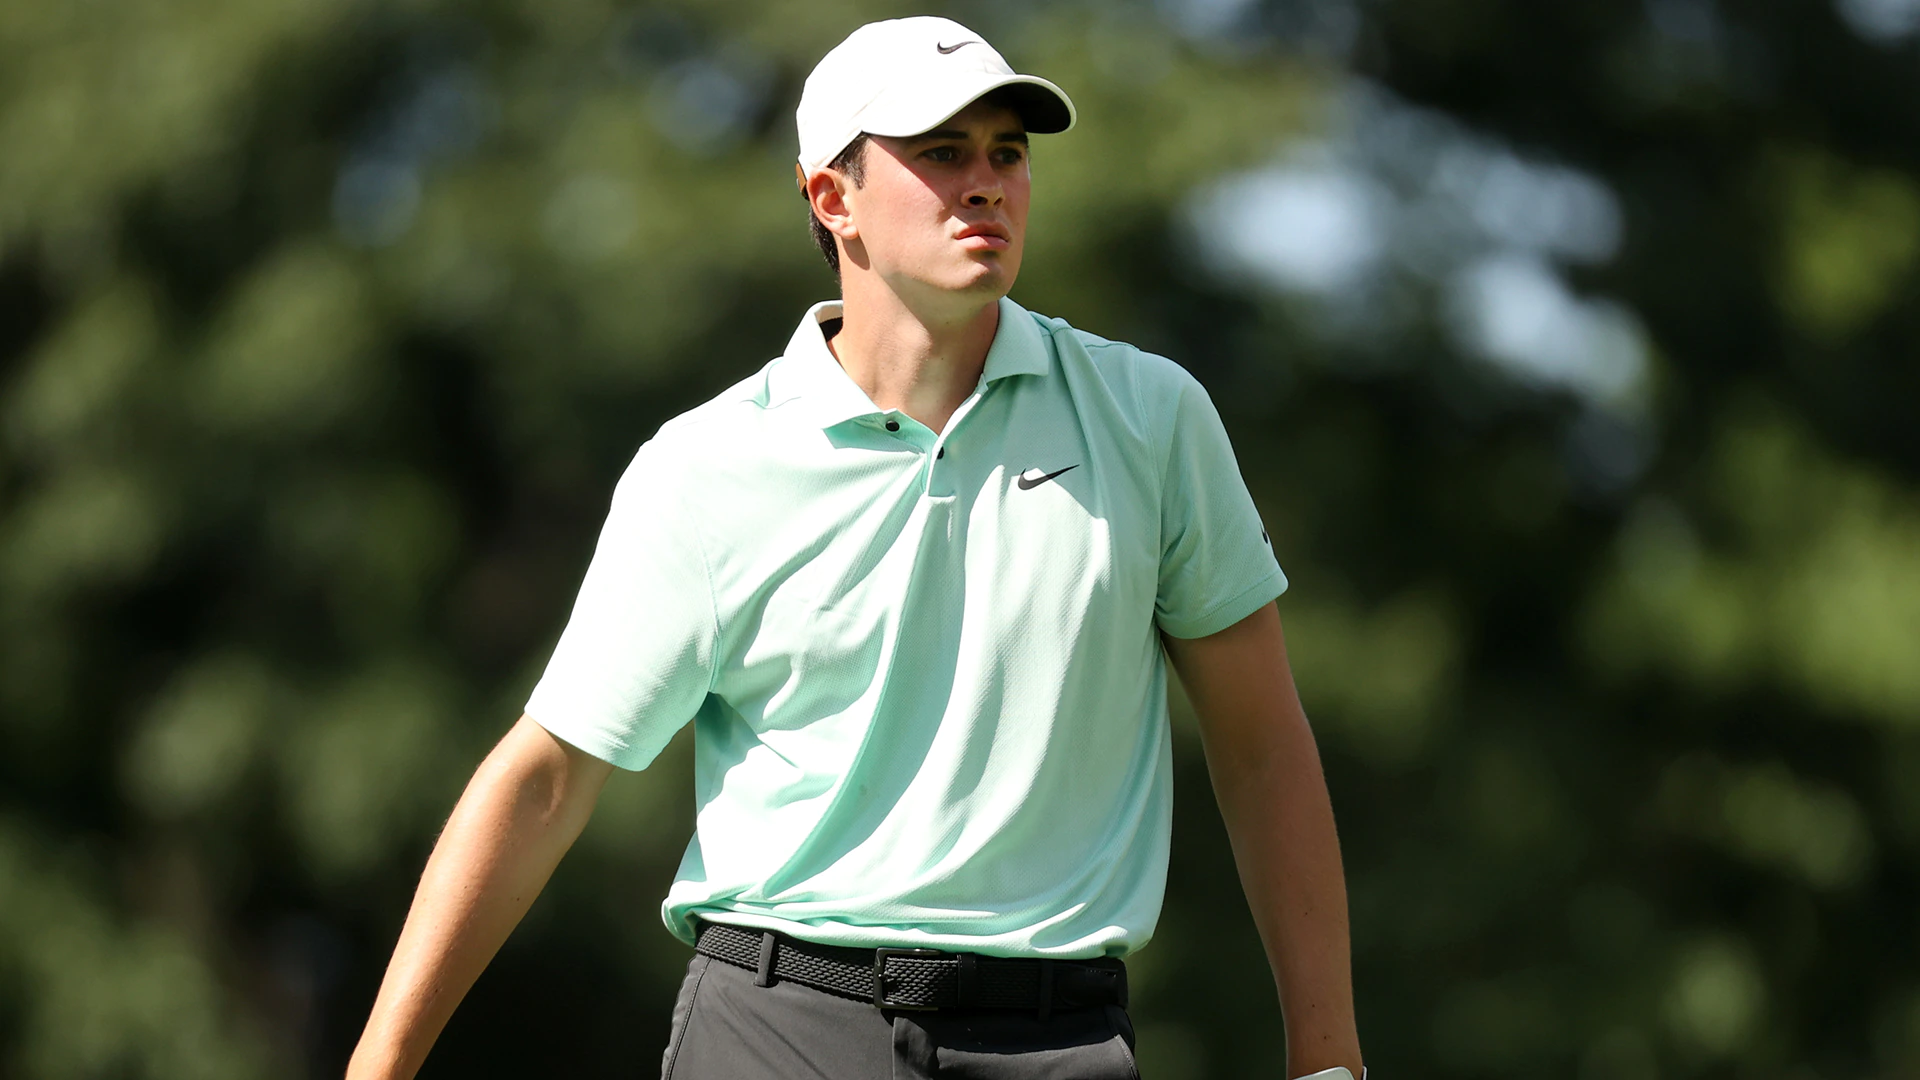 Davis Thompson shoots 63, takes early lead at Rocket Mortgage Classic